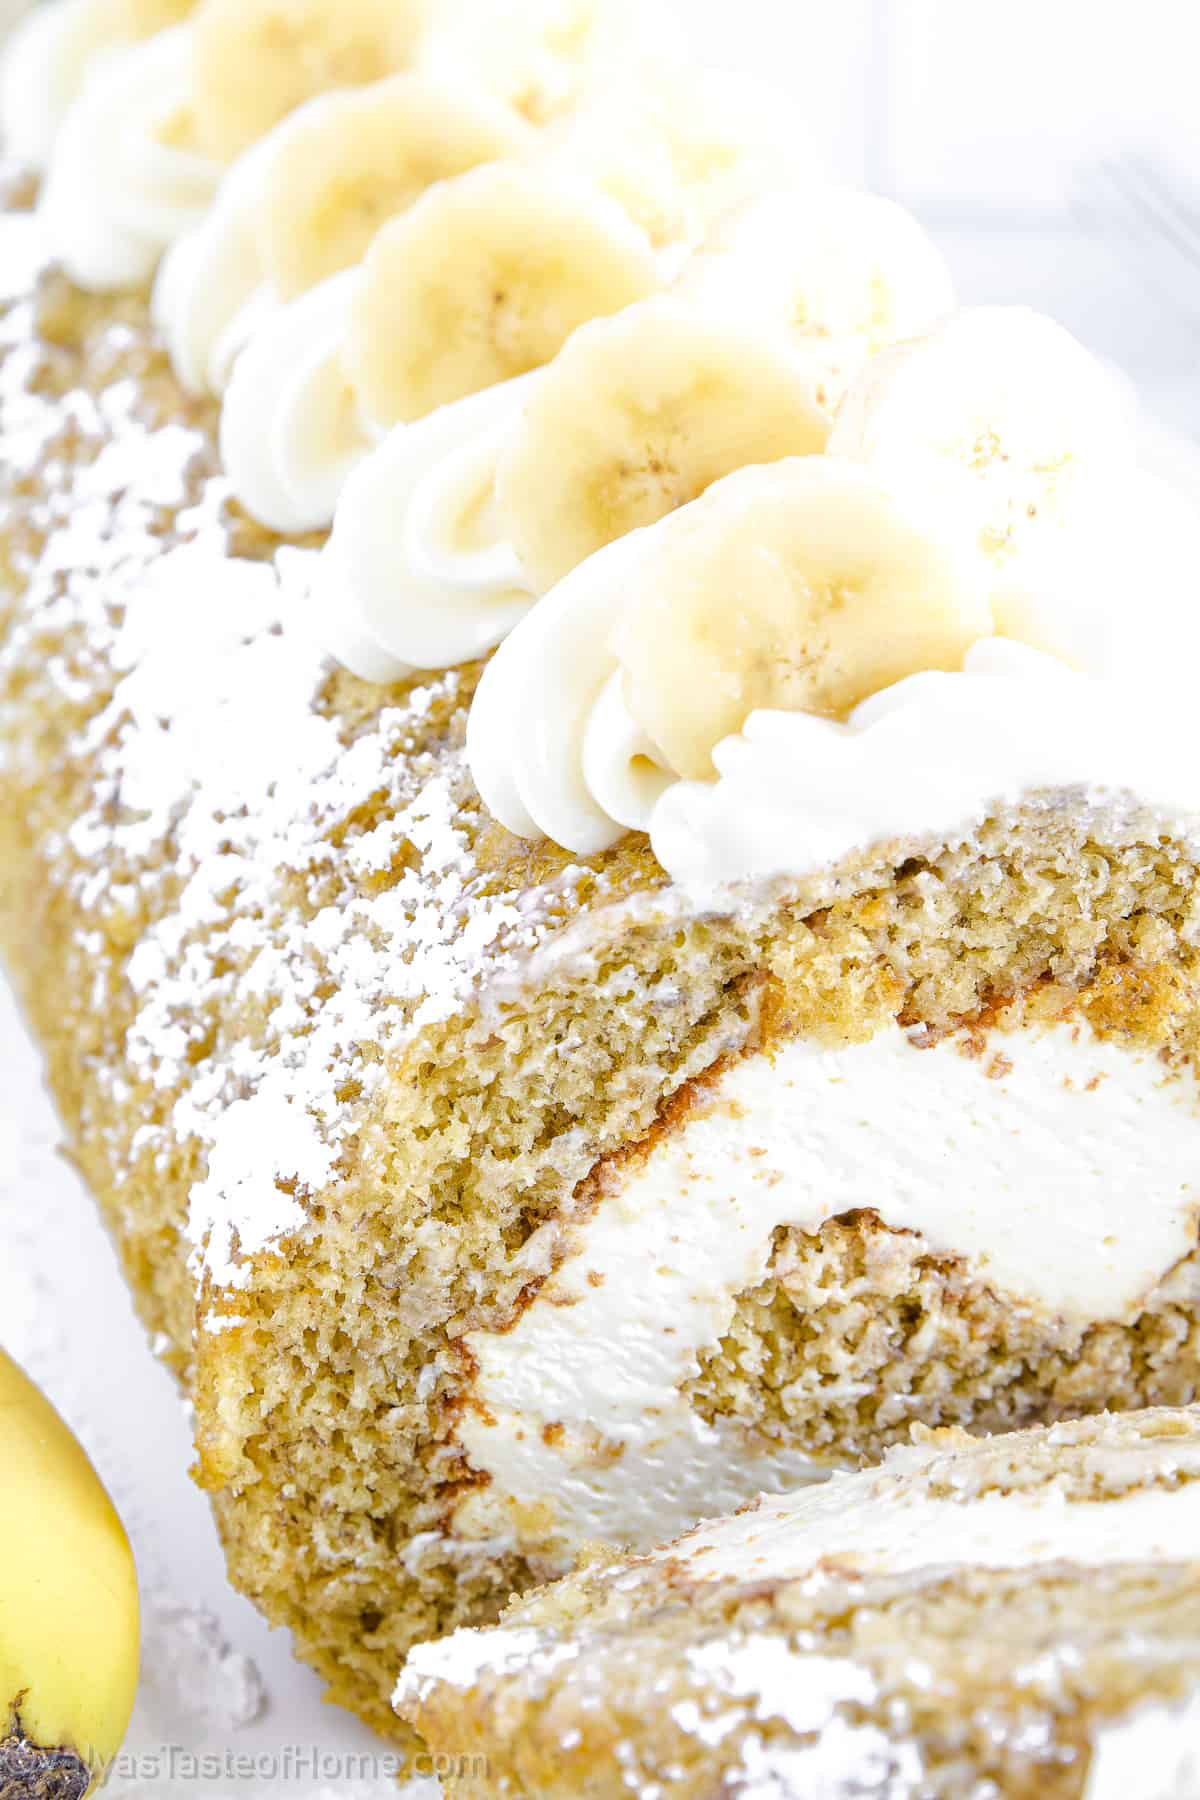 This Banana Roll features a fluffy and moist banana sponge cake filled with rich cream cheese frosting which is then rolled up and dusted with powdered sugar.